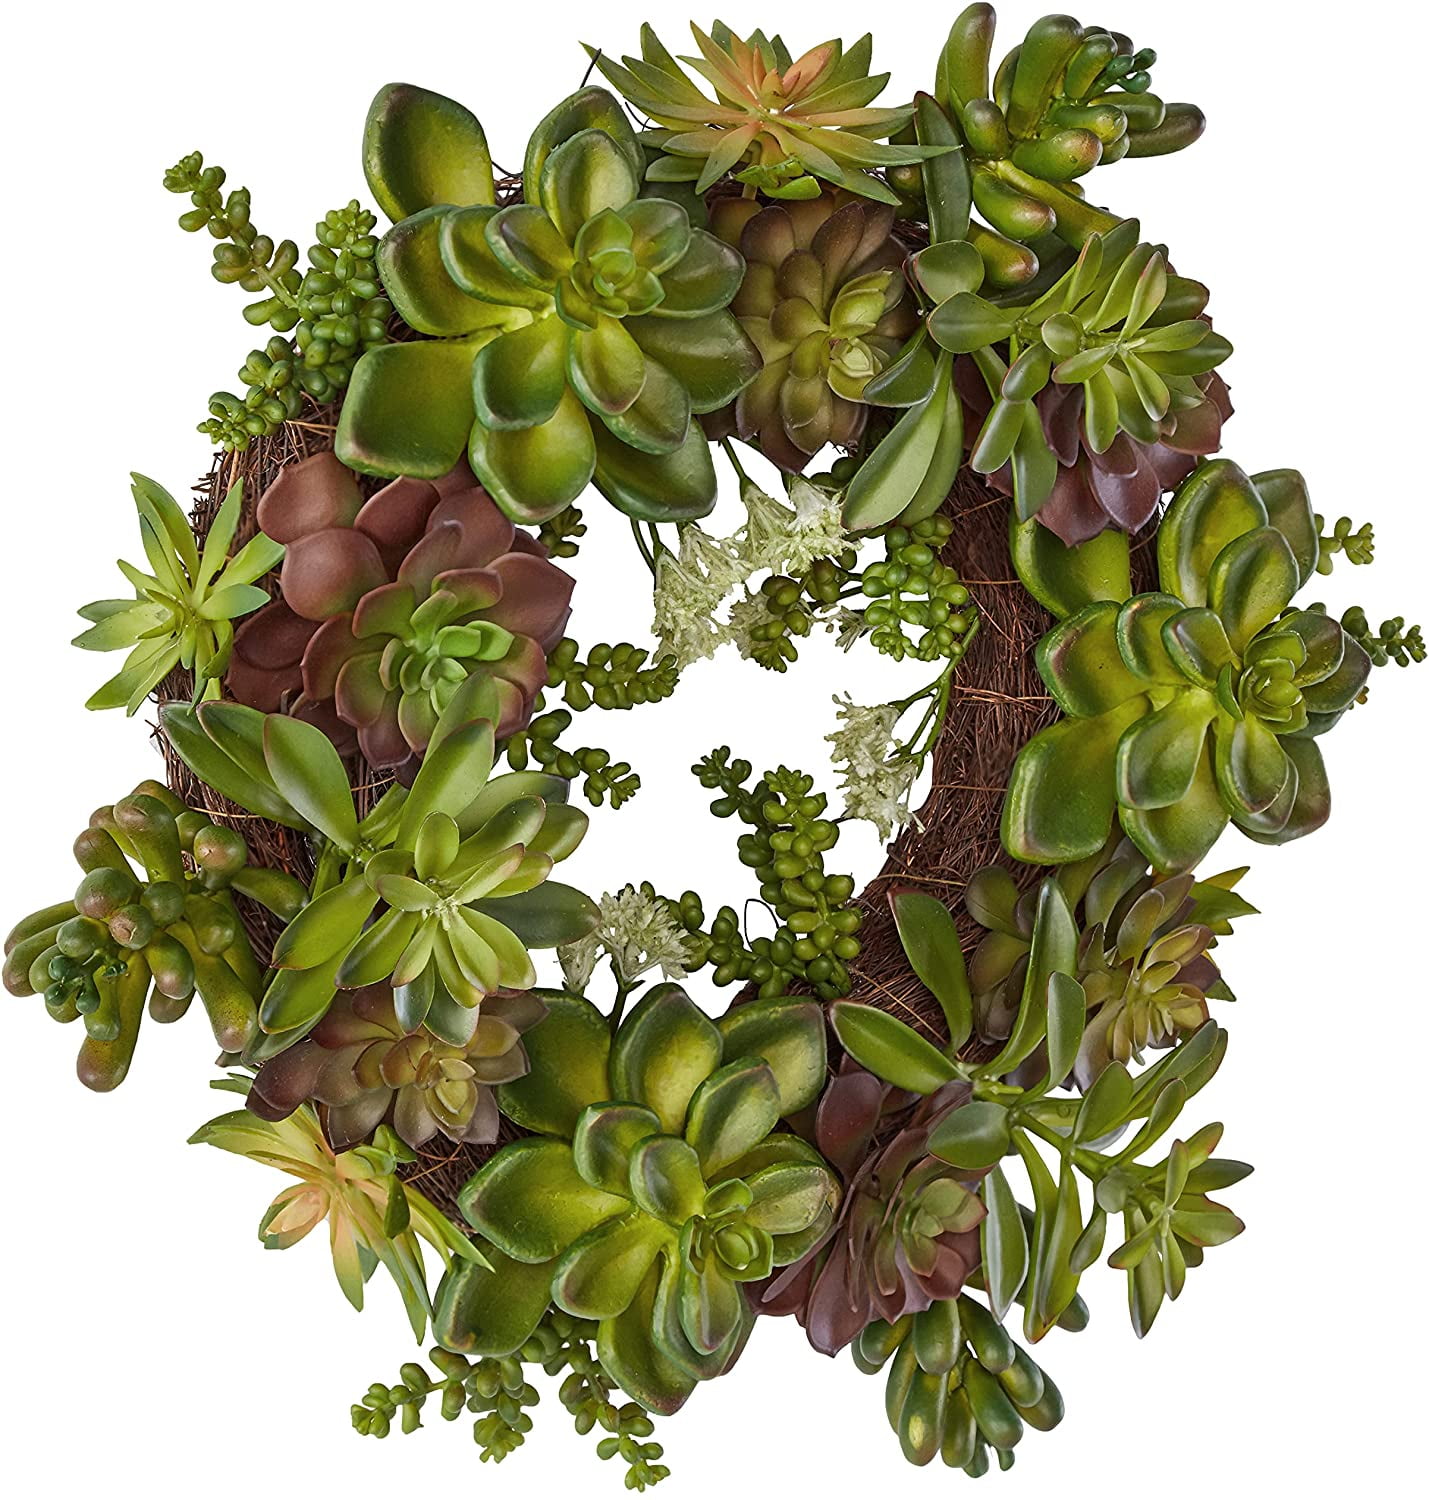 C&Z Artificial Succulents Wreath Set of 3 Hanging Gold Geometric Garland Greenery Wreath Wall Decor for Wedding Party Nursery Backdrop 